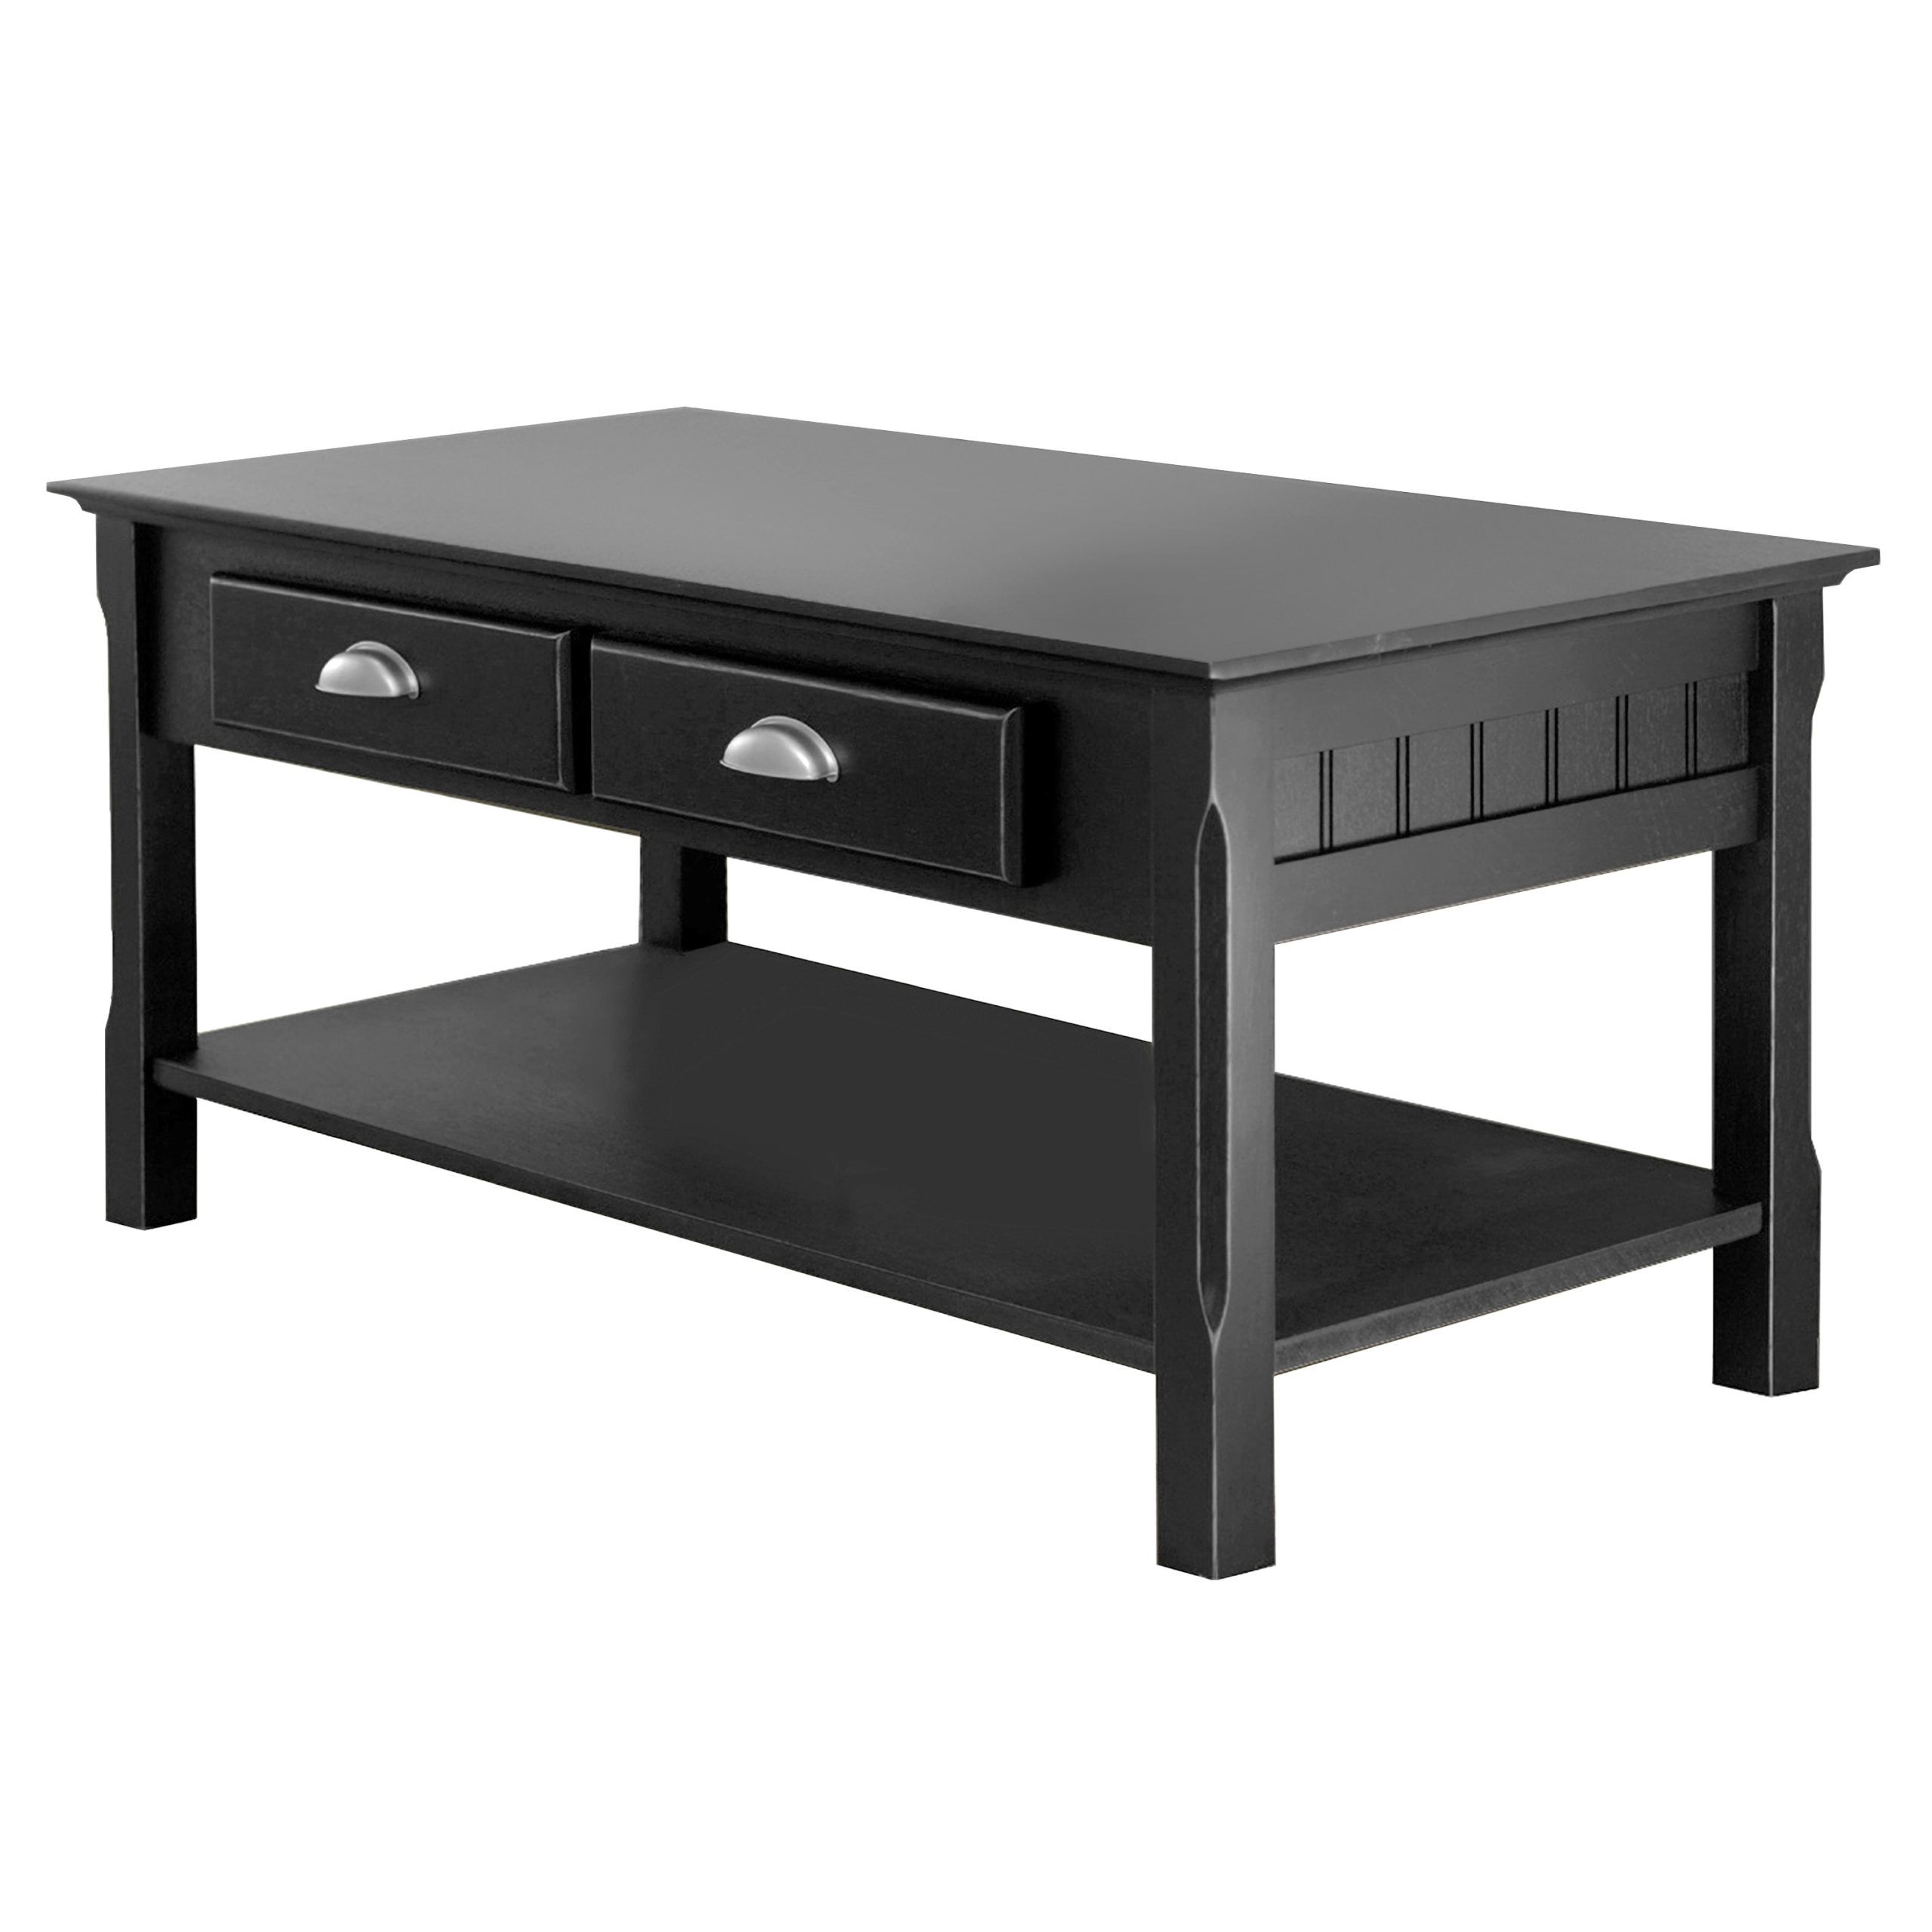 Black Wood Coffee Tables At Lowes Intended For Pemberly Row Replicated Wood Coffee Tables (View 11 of 20)